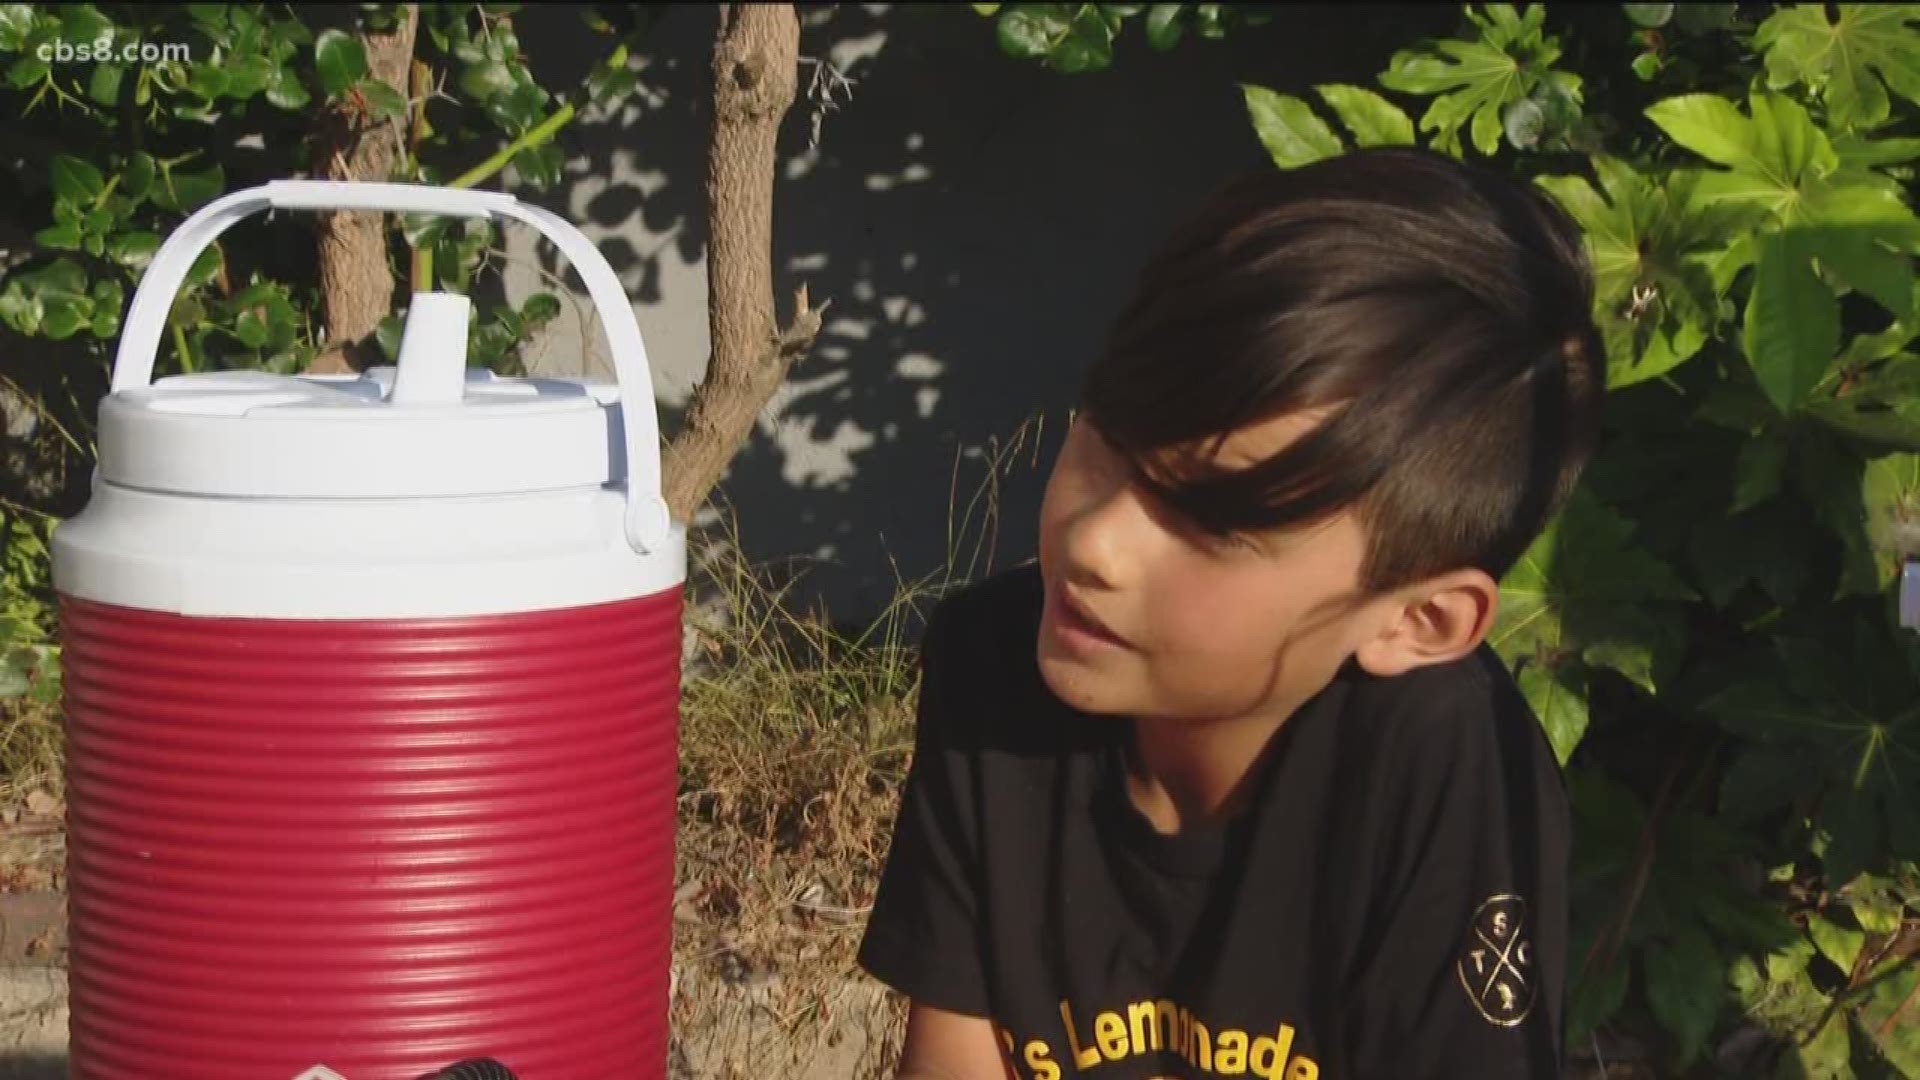 An Ocean Beach boy who uses his lemonade stand to pay it forward is raising money for a friend with a rare disease. Dylan Rodrigues, who is nine-years-old, sets up his lemonade stand outside his home on Bacon and Cape every Wednesday as folks come and go from the farmer’s market in order to raise money for his friend Kal.